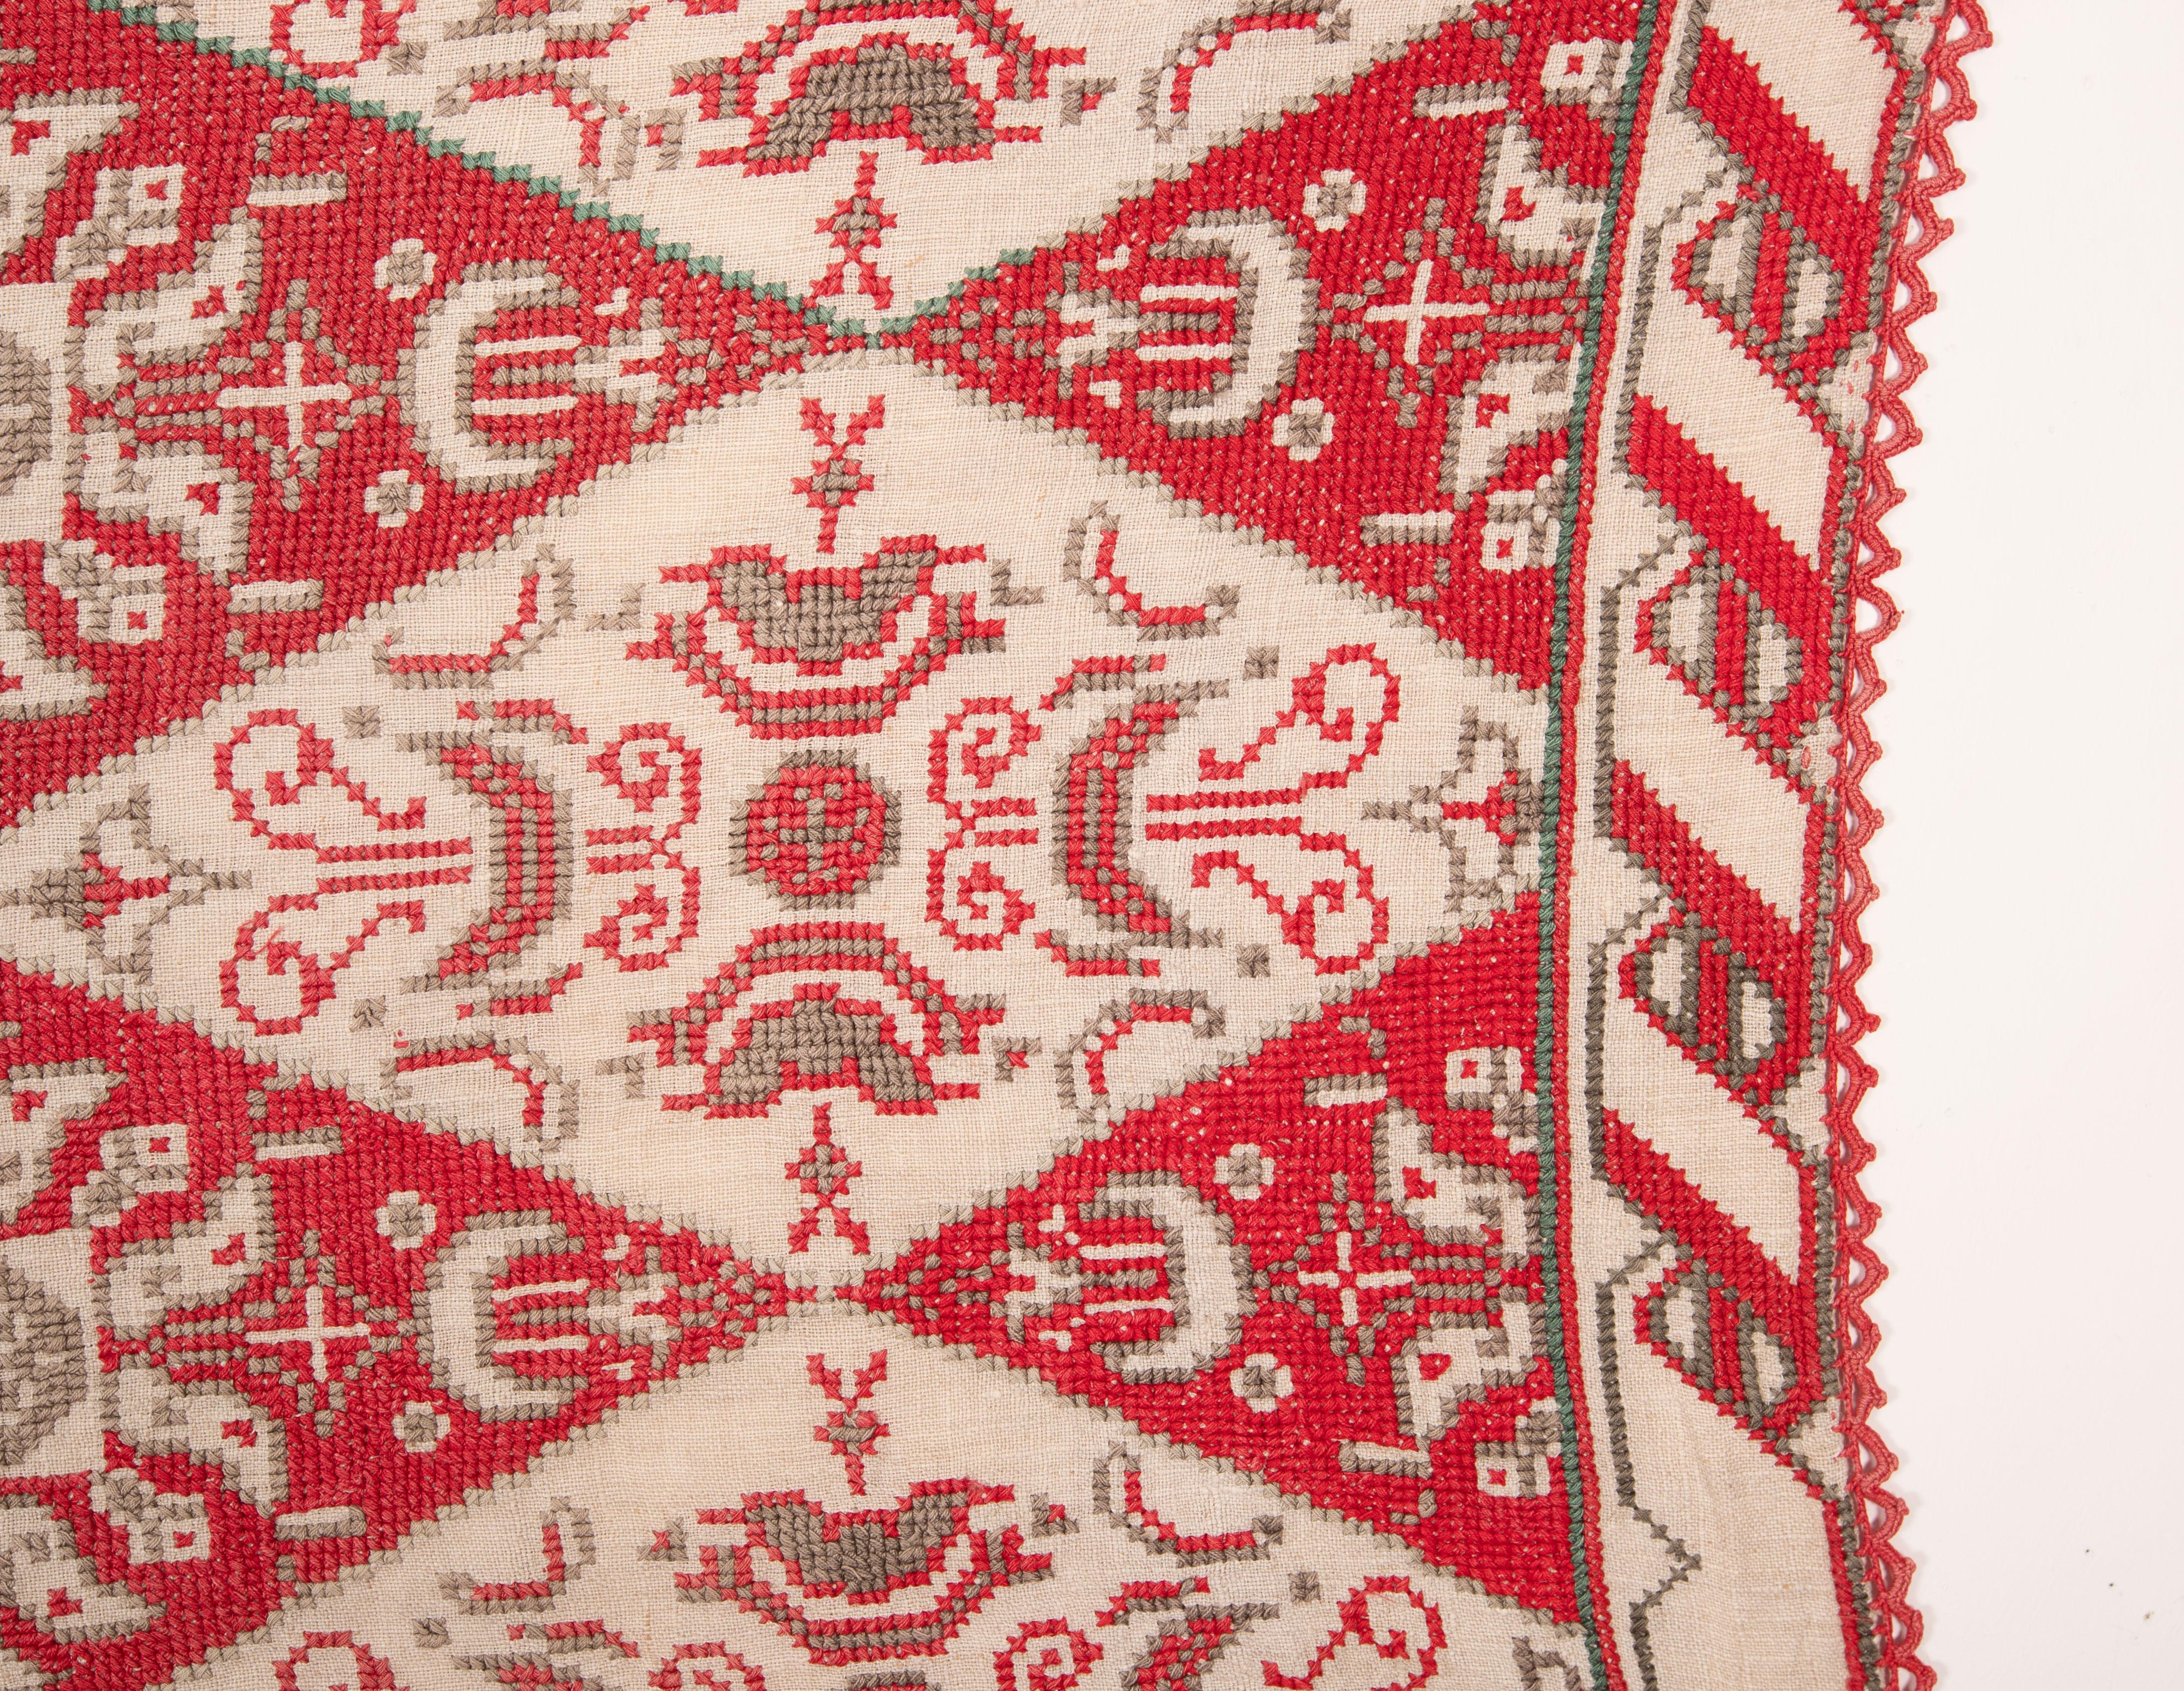 Embroidered Eastern European Cotton Embroidery, Early 20th C. For Sale